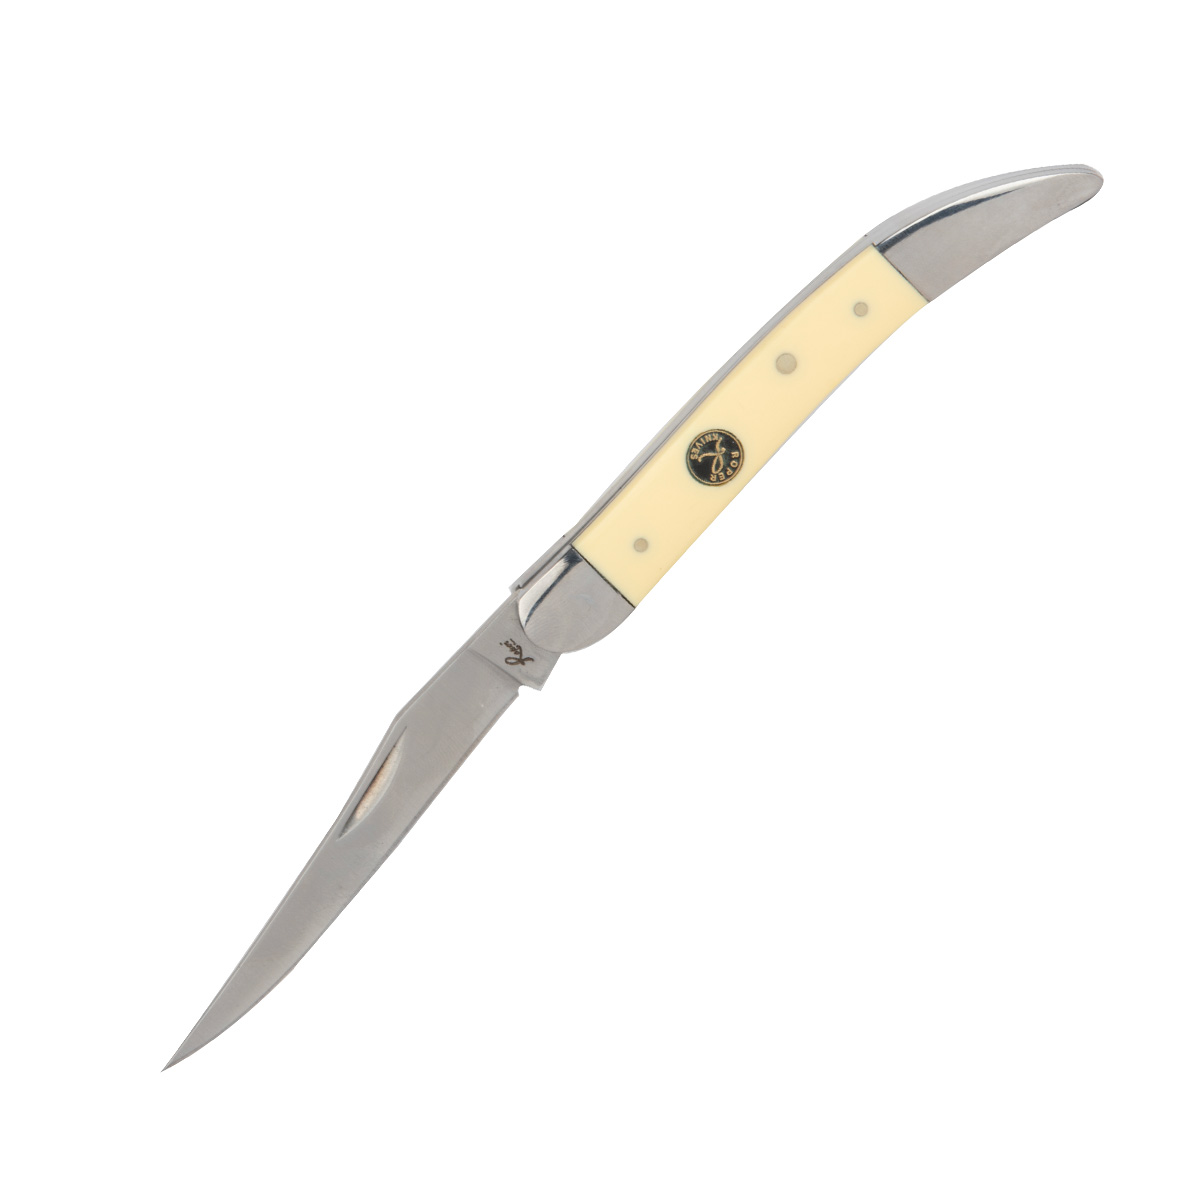 Sharp and Precise: The New American Buffalo Pecos Large Toothpick